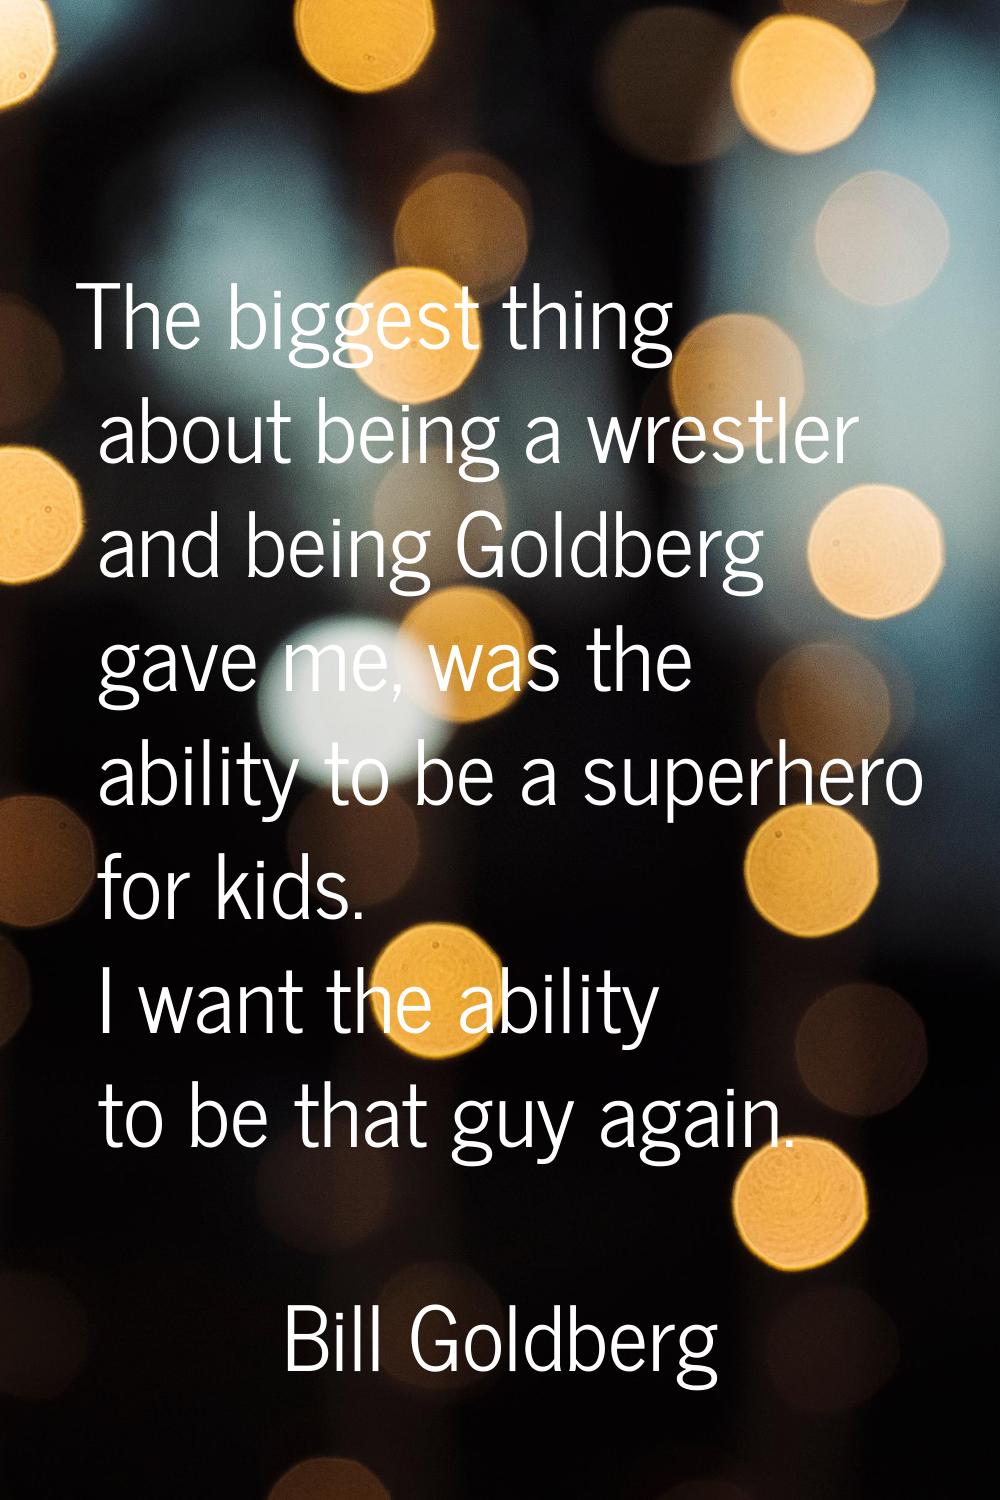 The biggest thing about being a wrestler and being Goldberg gave me, was the ability to be a superh